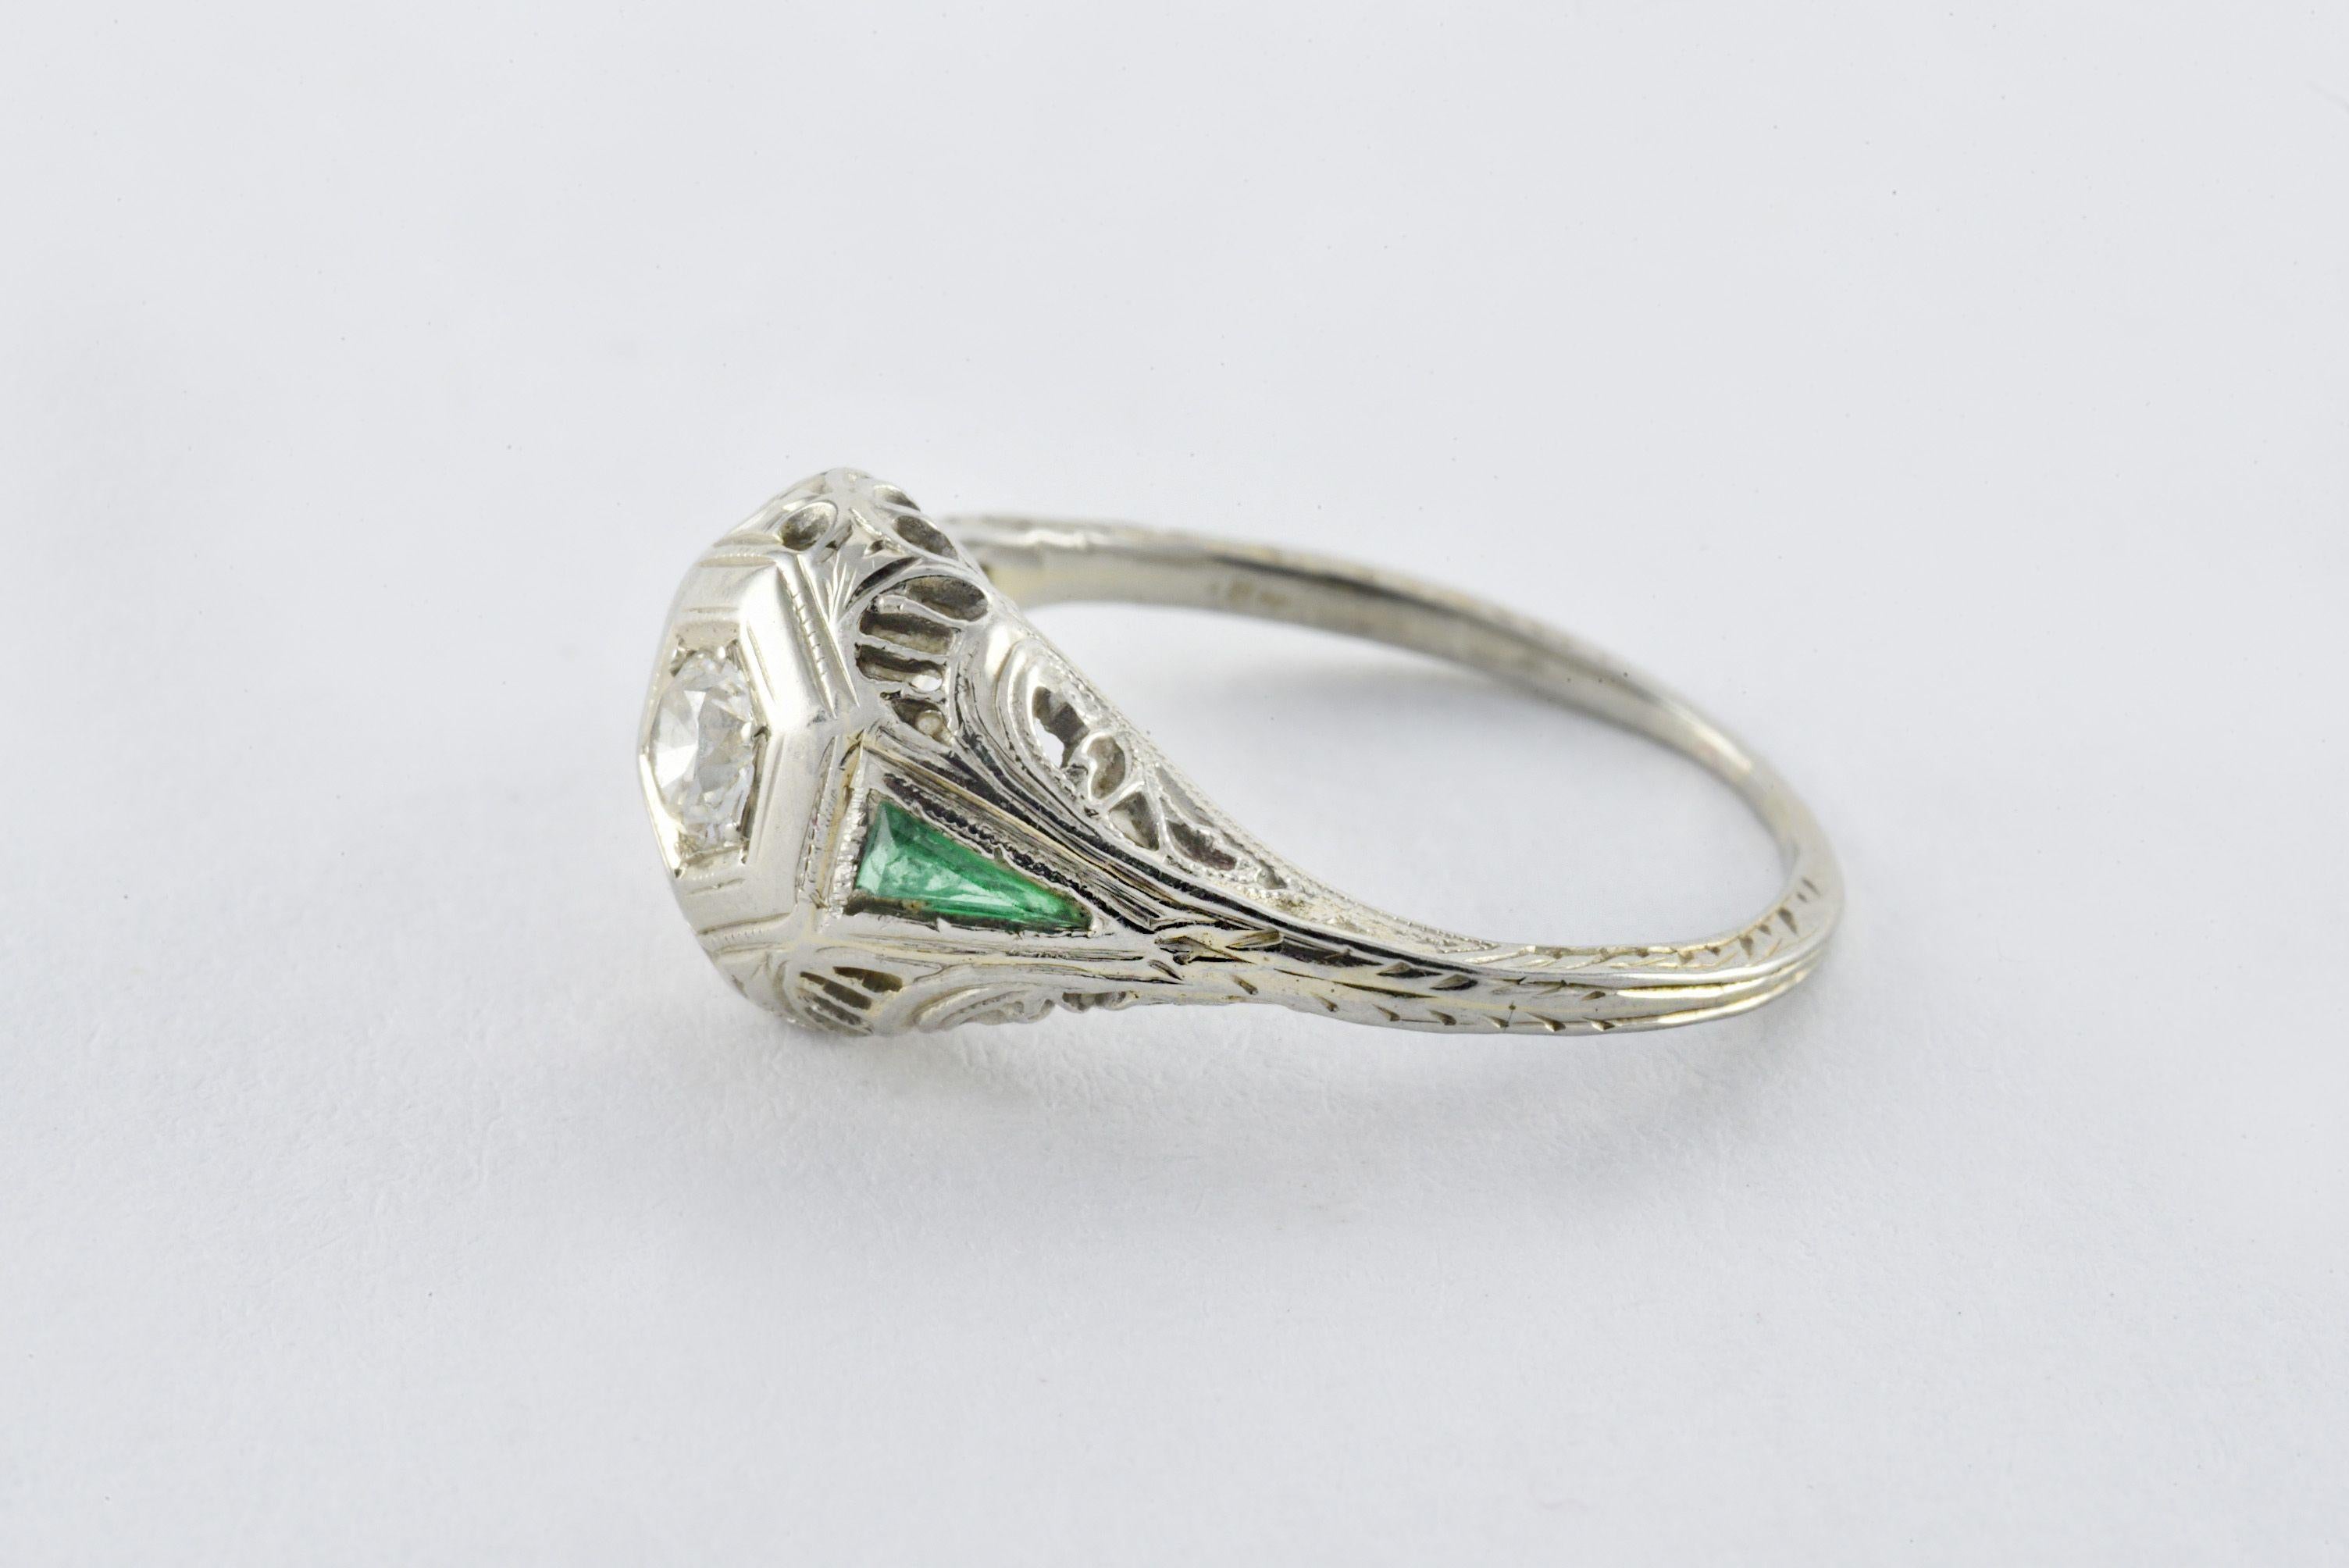 An Old European cut diamond measuring approximately 0.25 carats sits at the center of this classic Art Deco gem accented with two trillion cut green emeralds and fine filigree and mounted in 18kt white gold. 
